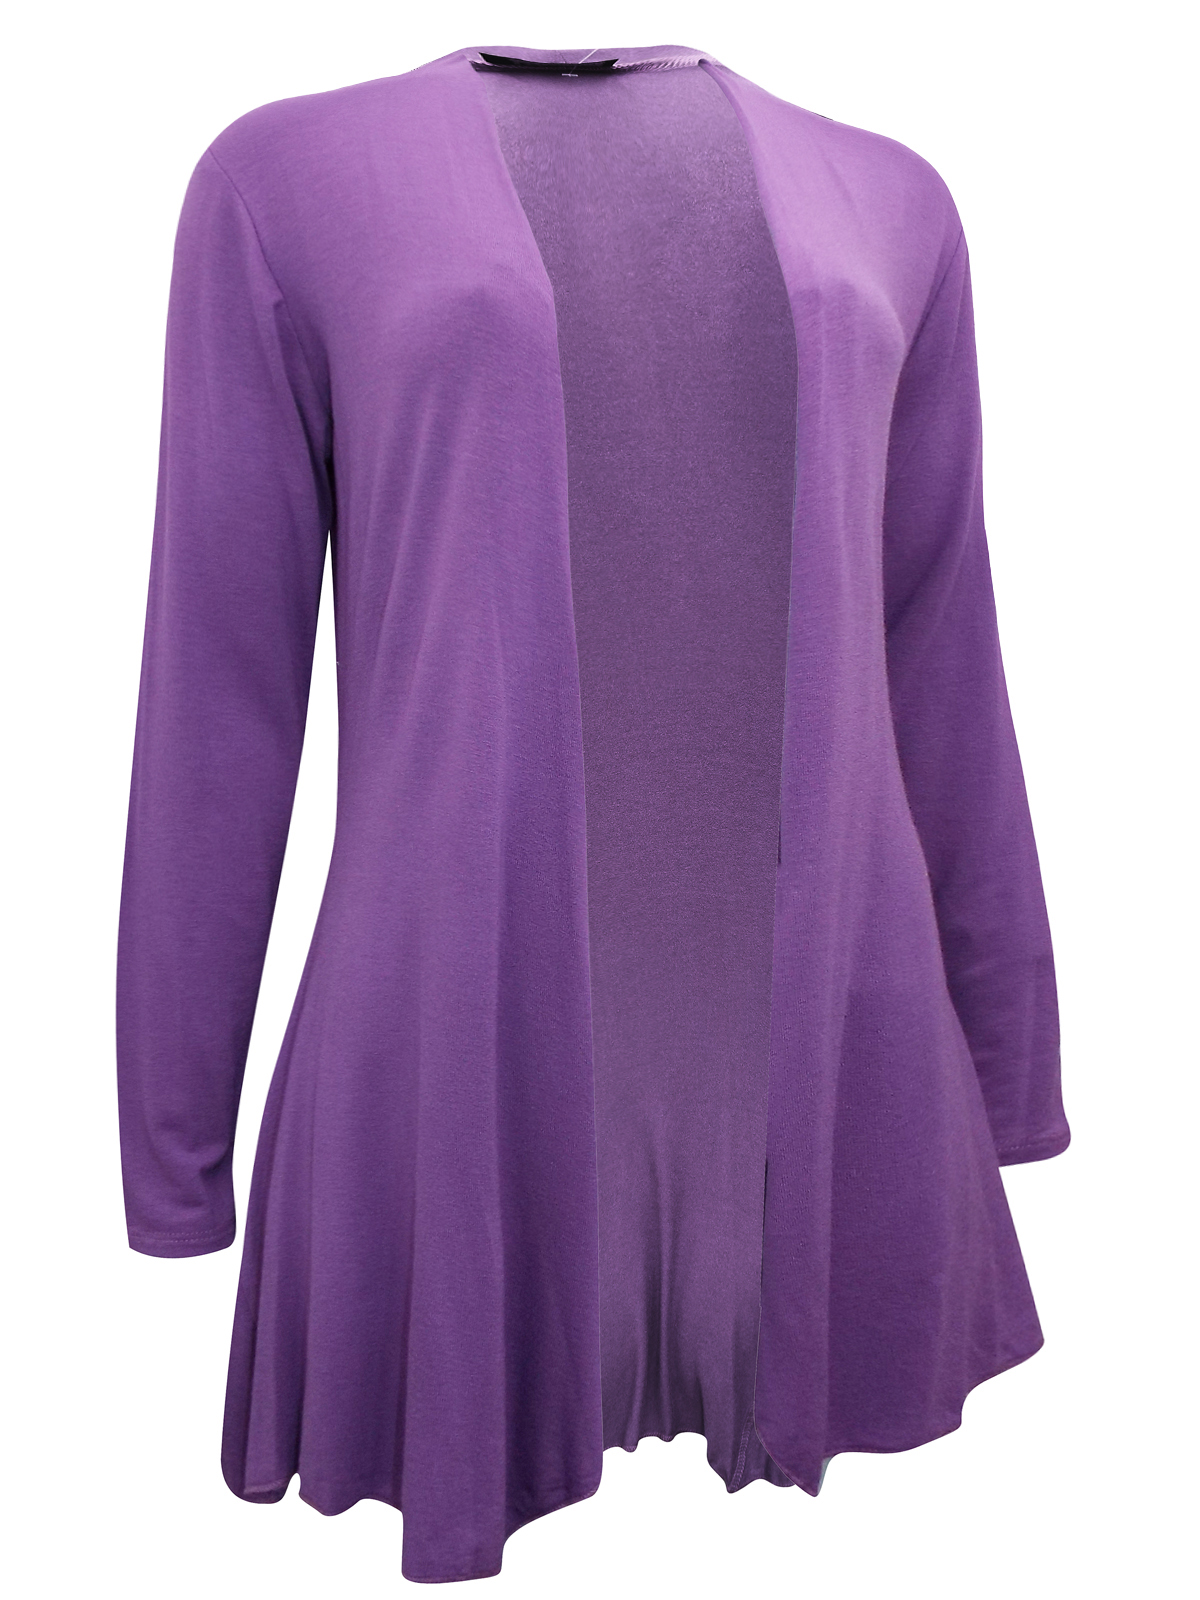 //text.. - - PURPLE Open Front Long Sleeve Jersey Cardigan - Size Small ...